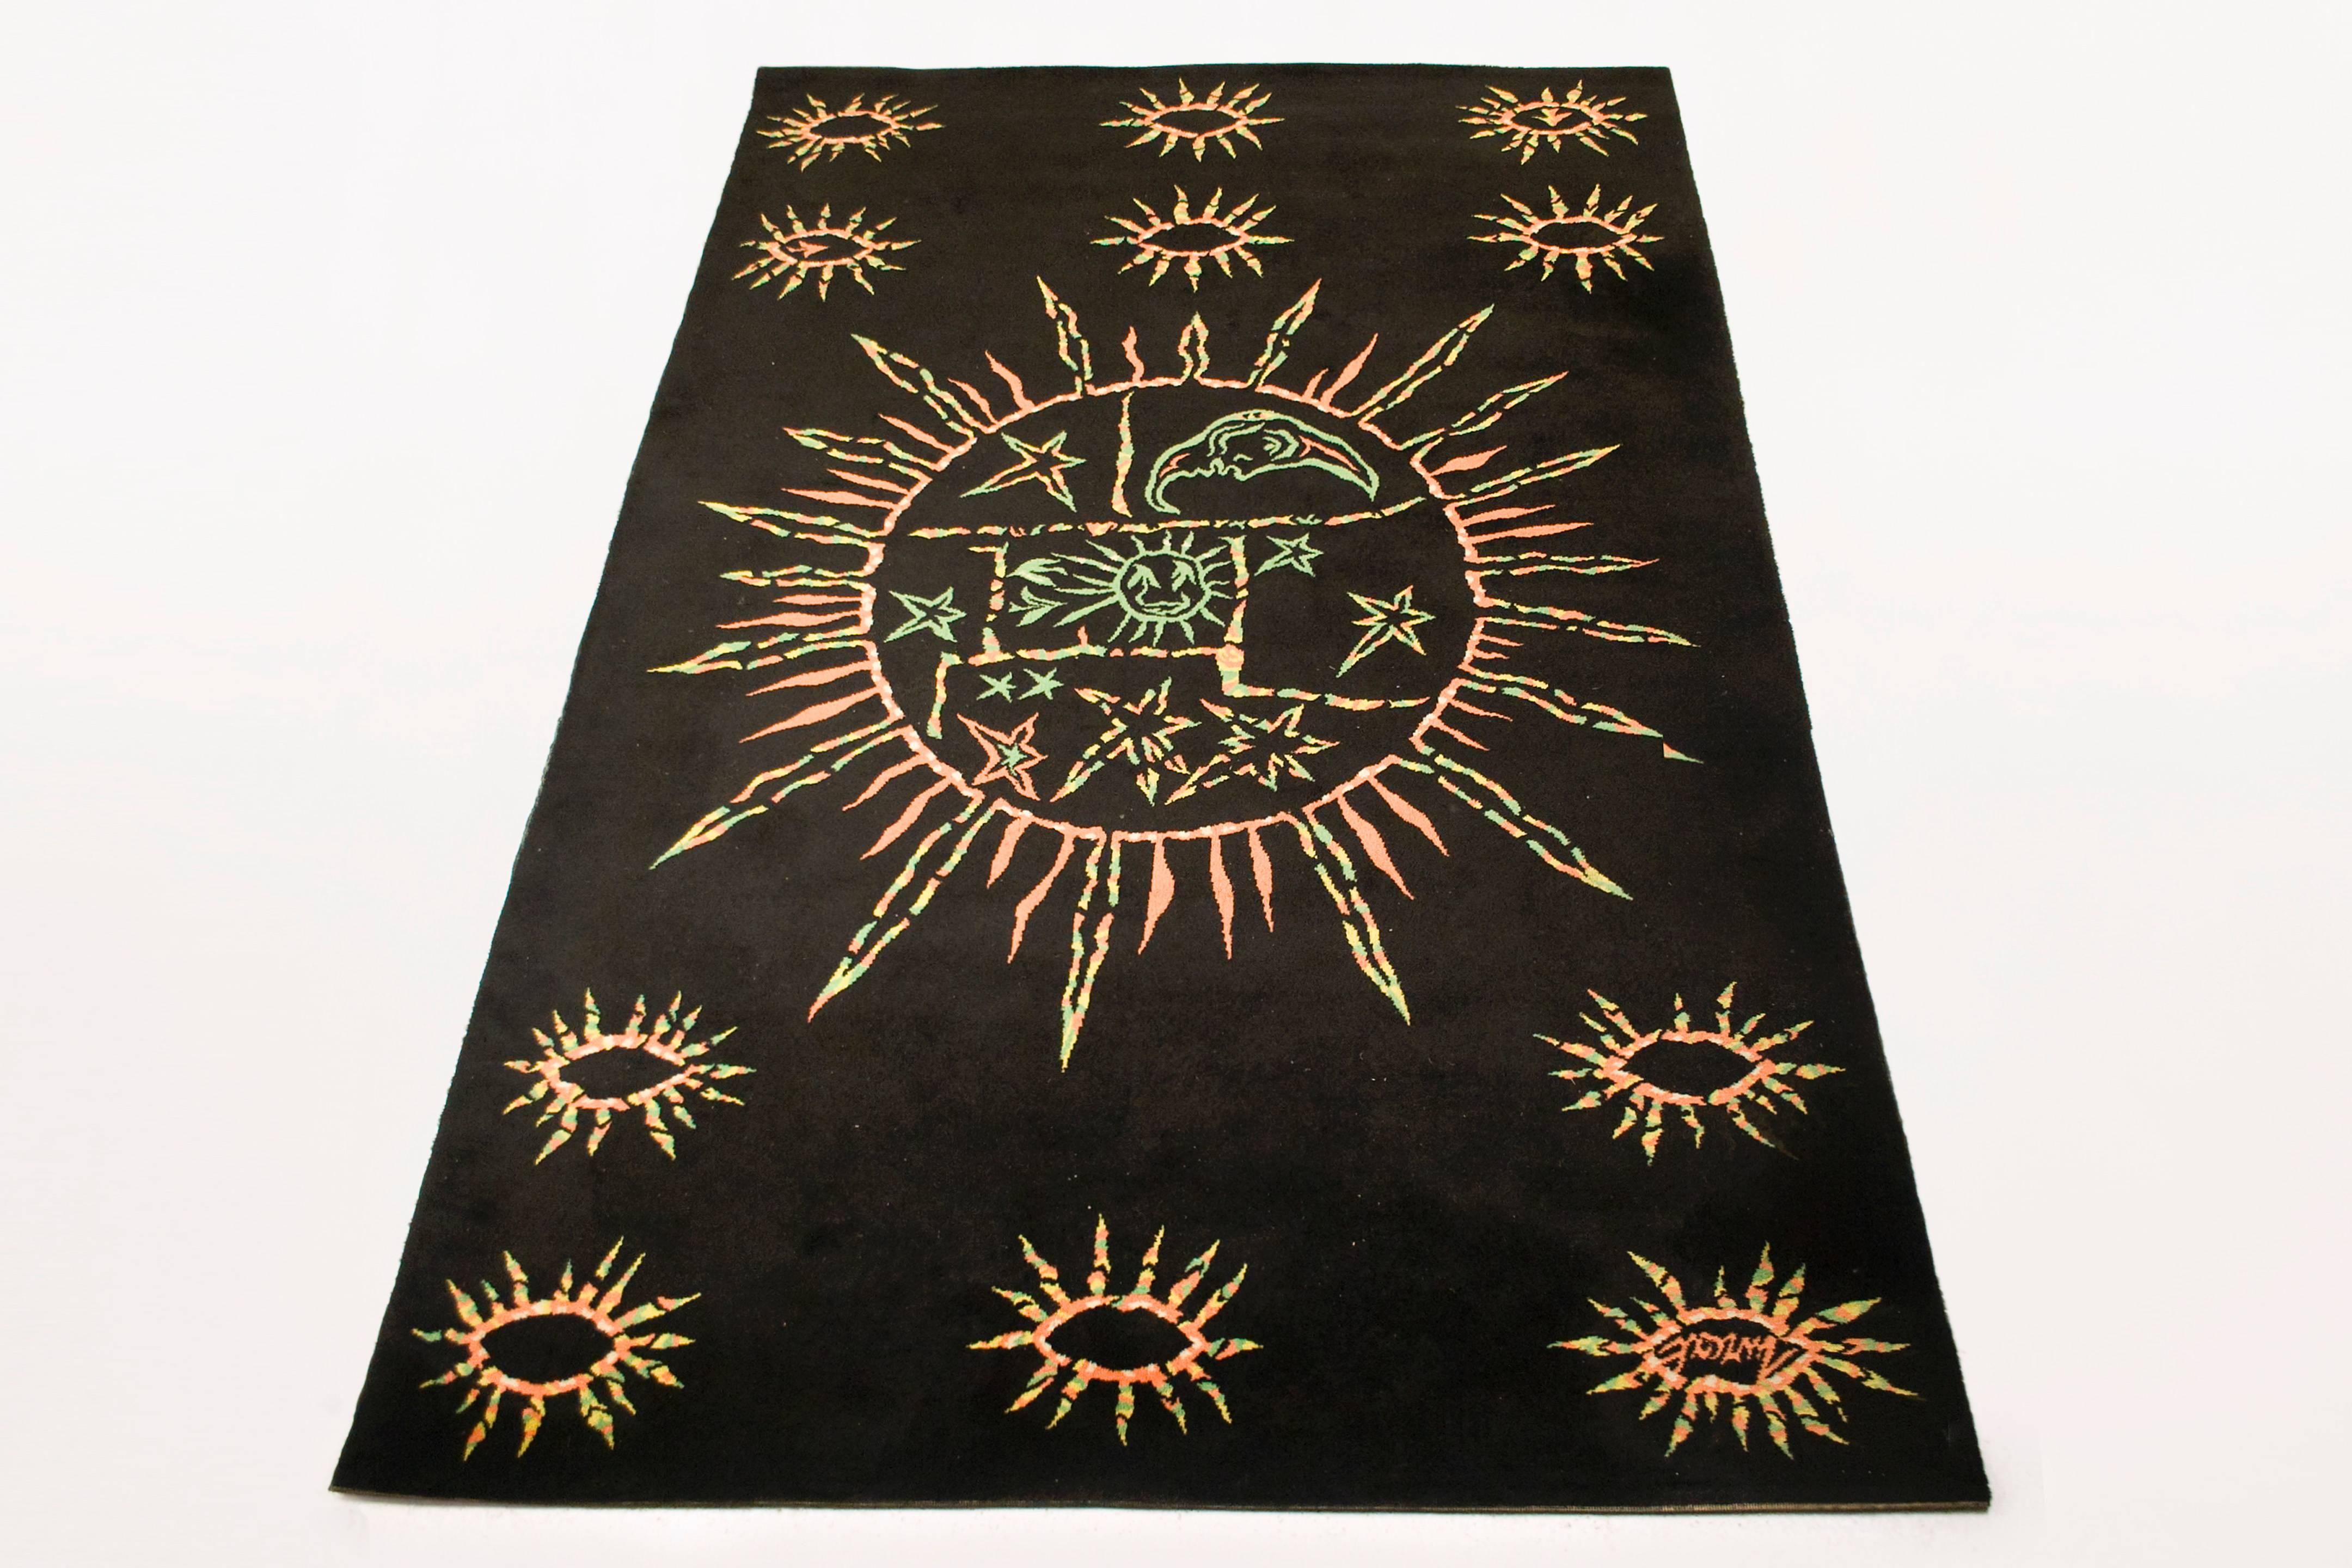 Rug by Jean Lurçat, circa 1960, France. Wool. Made by the "Ateliers des Saints-Pères" very good vintage condition.